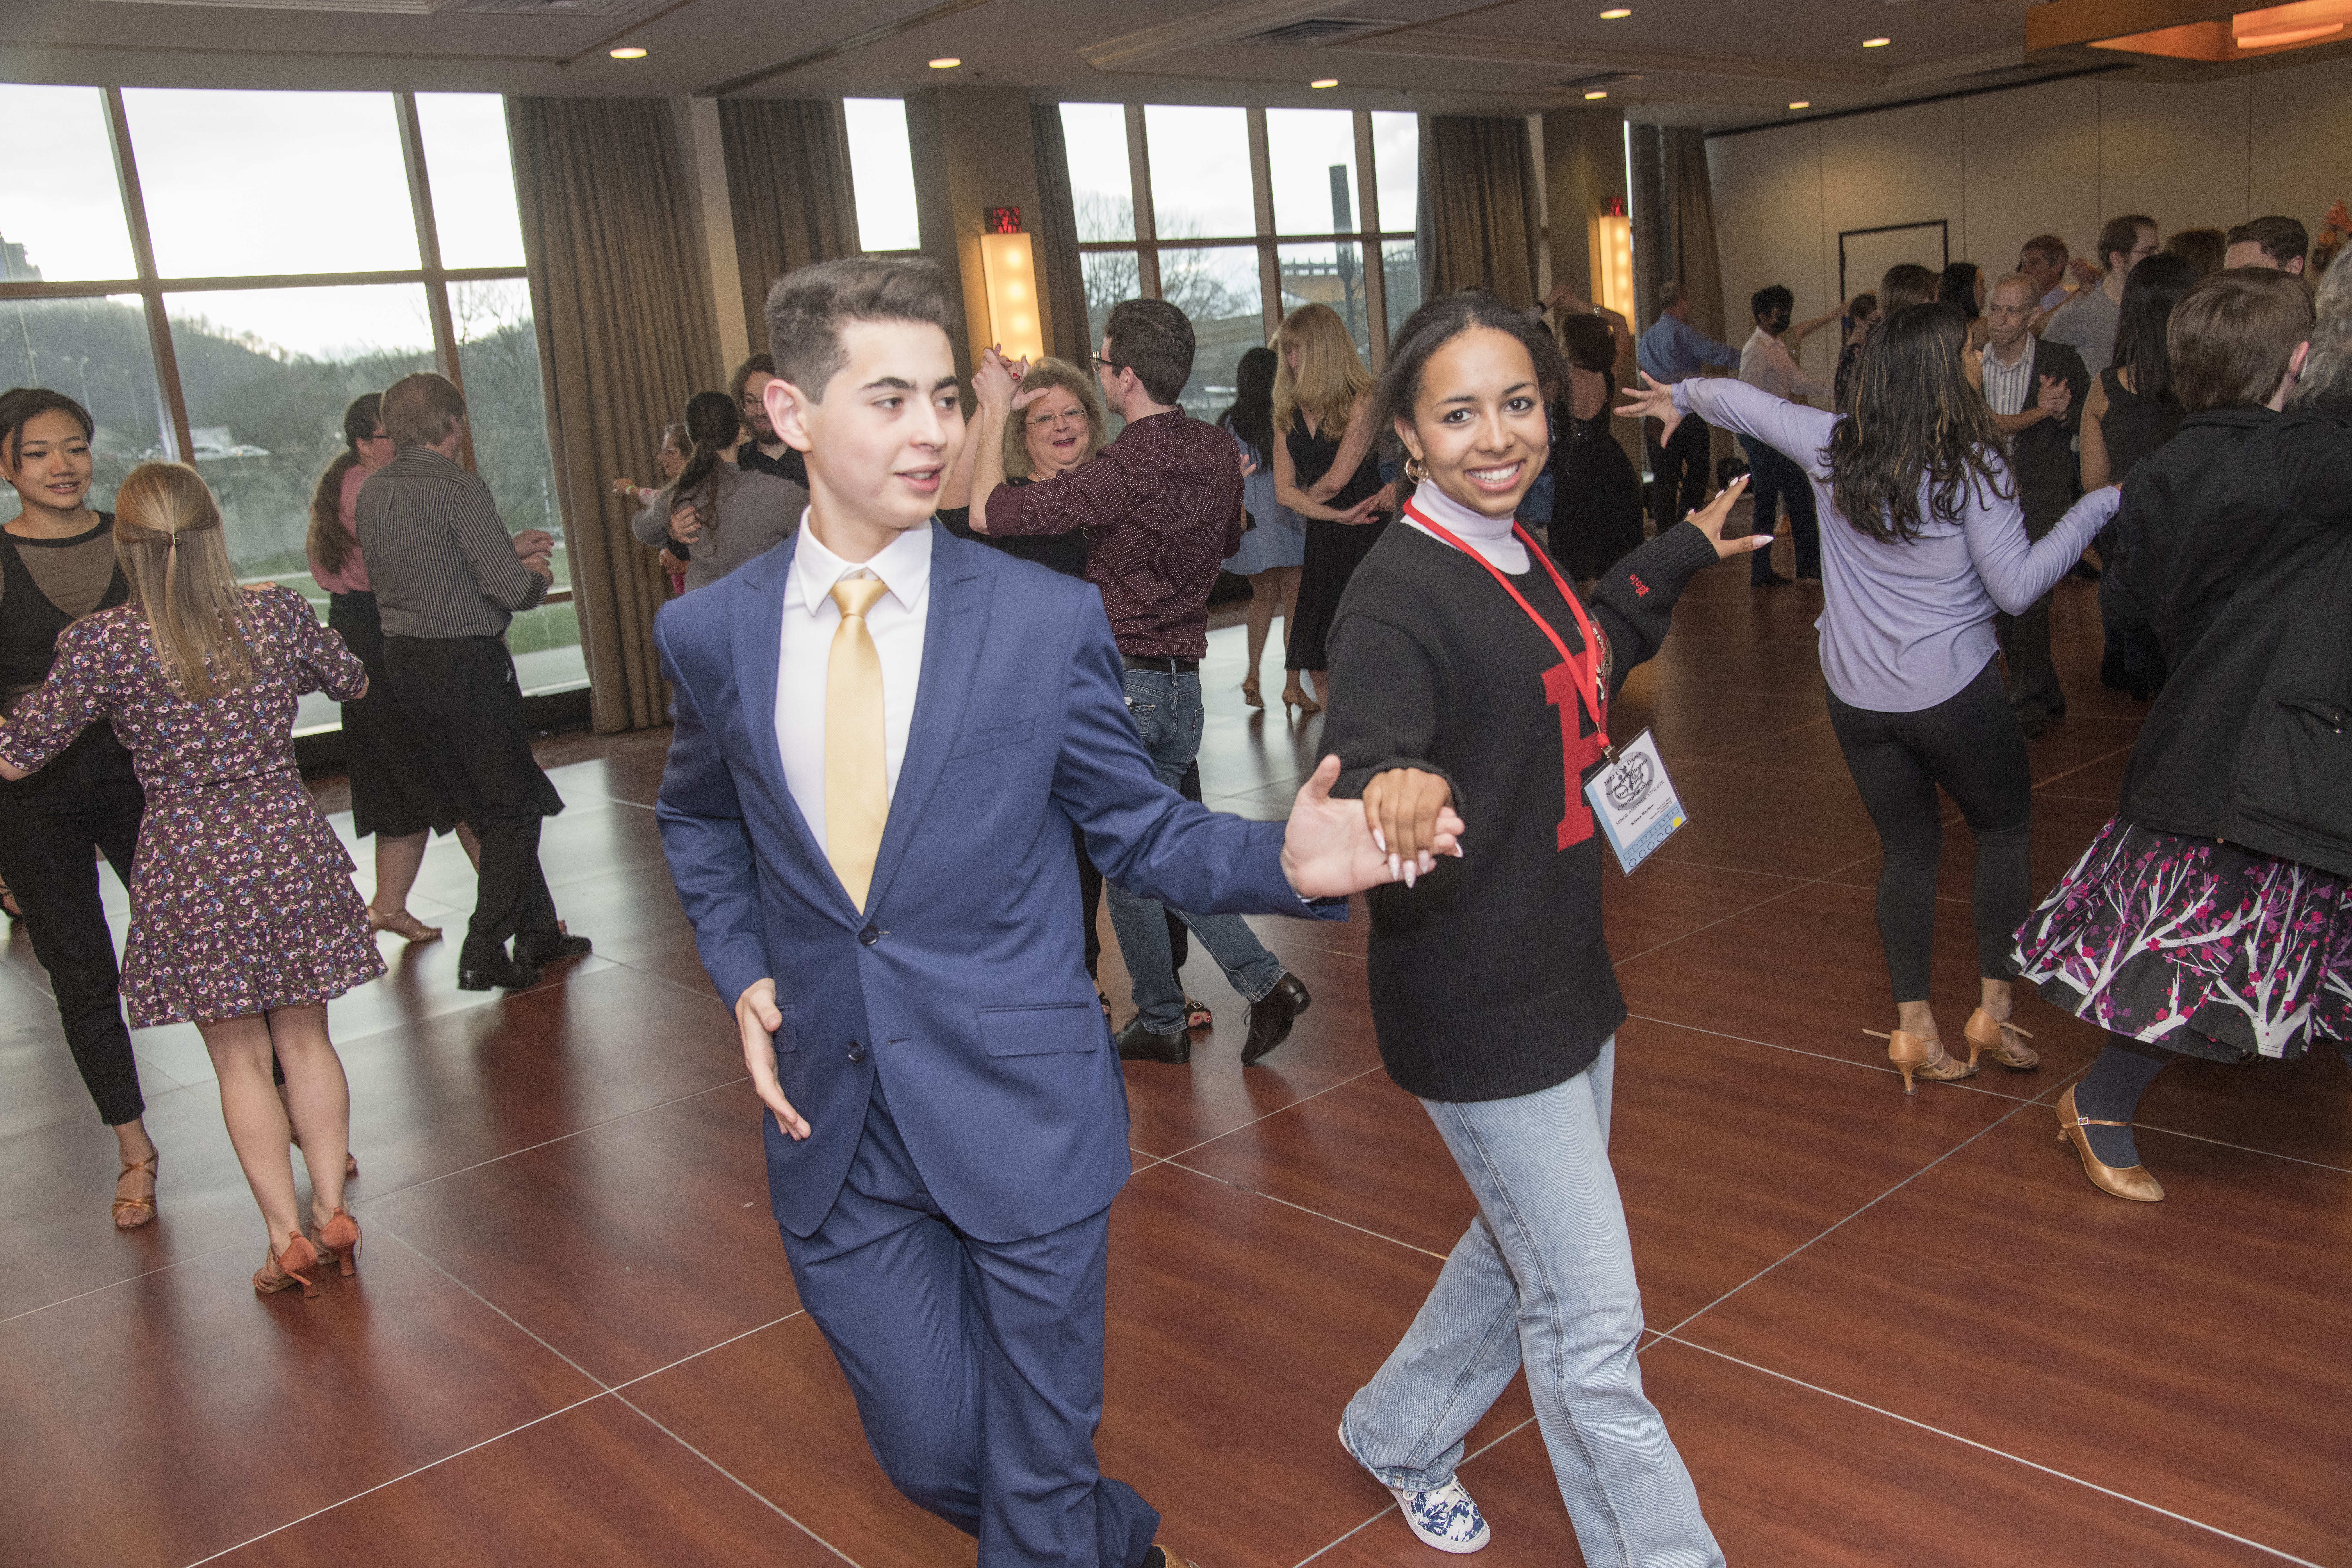 Social Dancers, and some of the competitors, took time to relax and have fun at the Saturday Night Social Dance. Salvatore Bonfardeci and Kianna Barlow were all smiles during a Rumba. Photo by Patt Panzer.